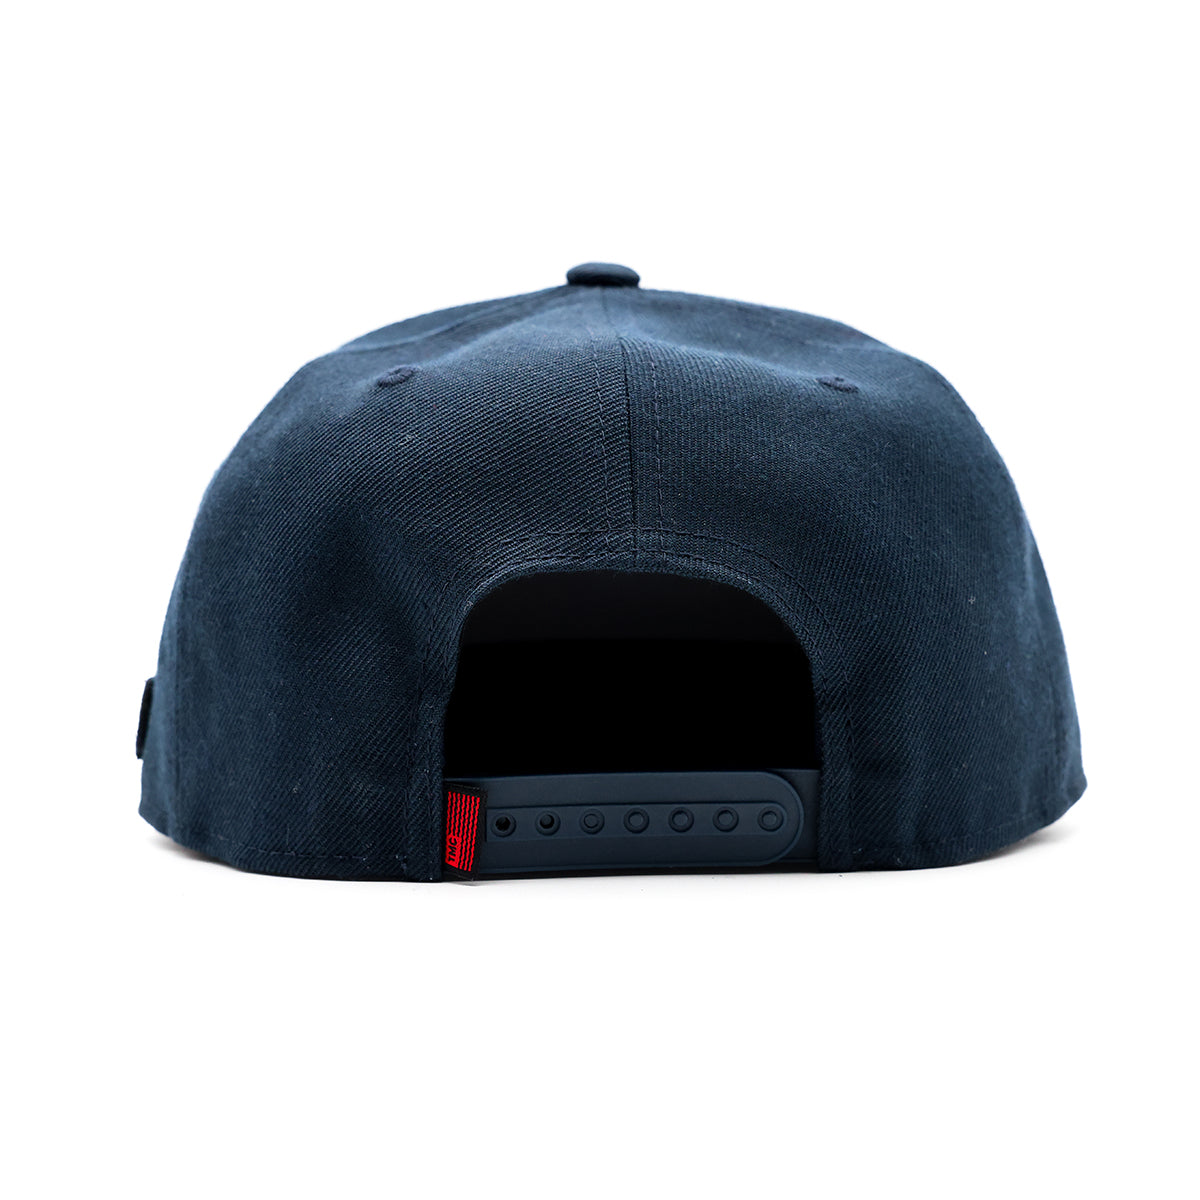 Victory Limited Edition Snapback - Navy/White - Back